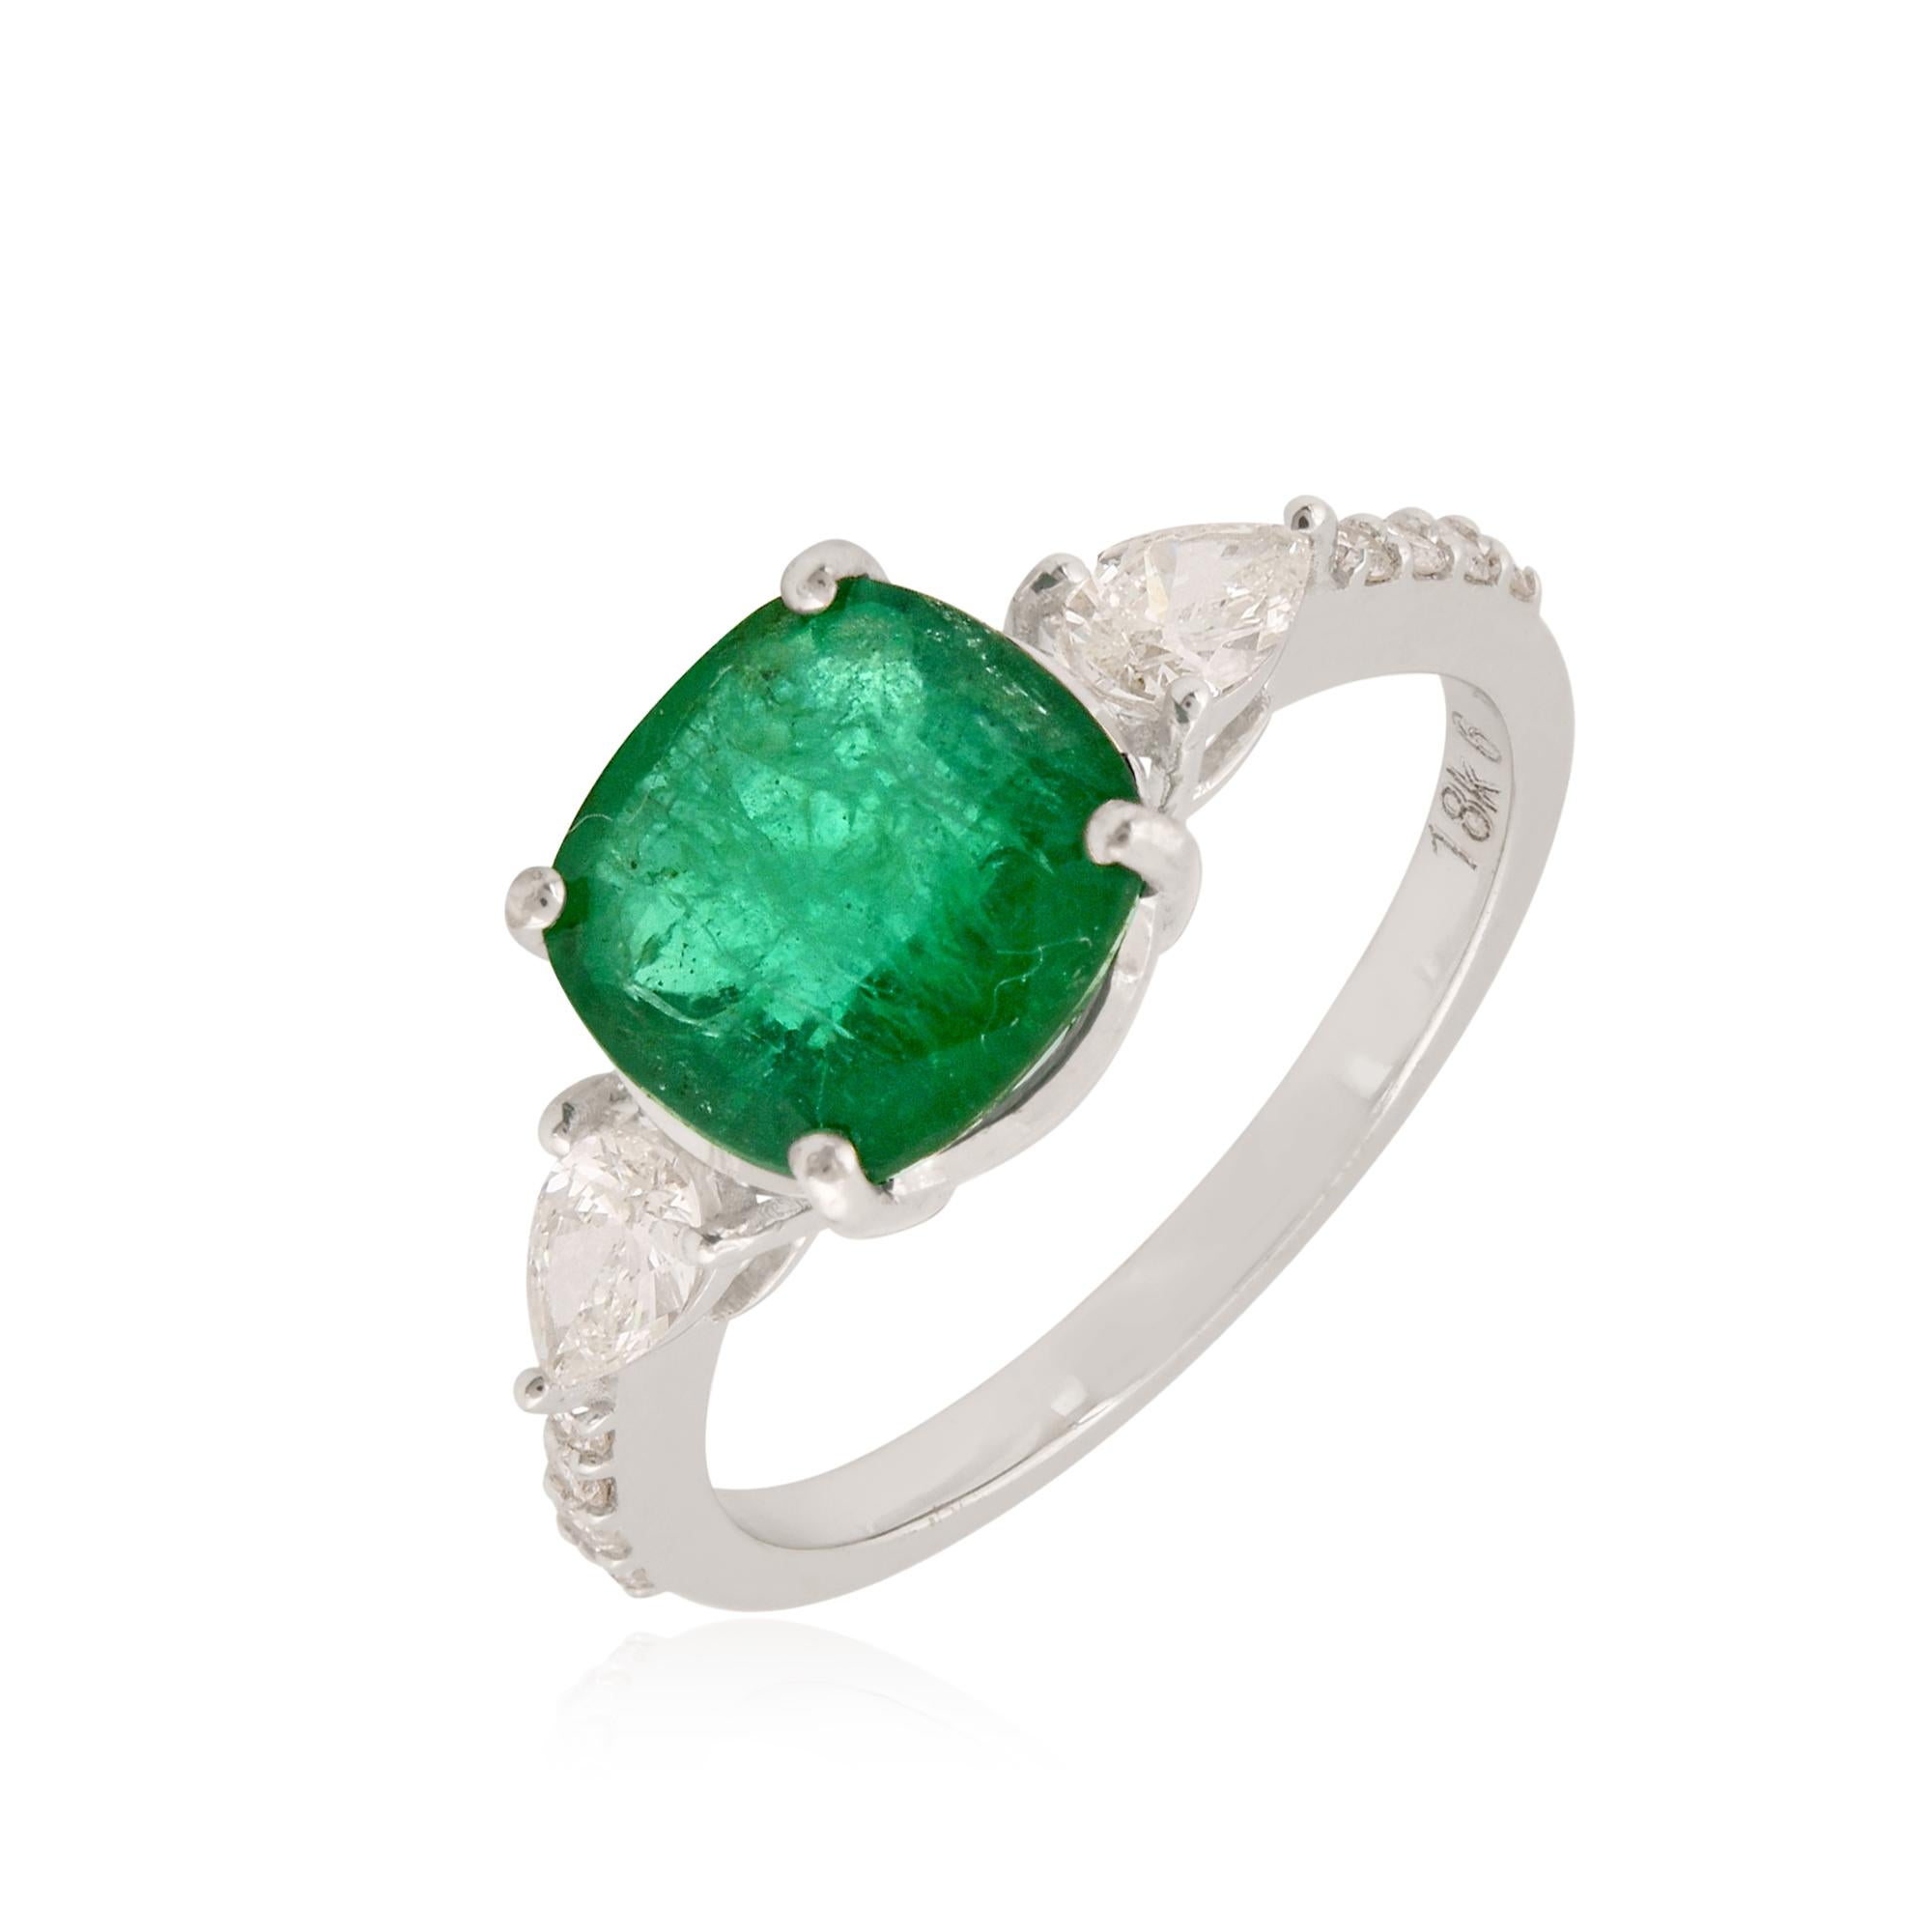 For Sale:  Natural Emerald Cocktail Ring Pear Diamond Solid 18k White Gold Handmade Jewelry 2